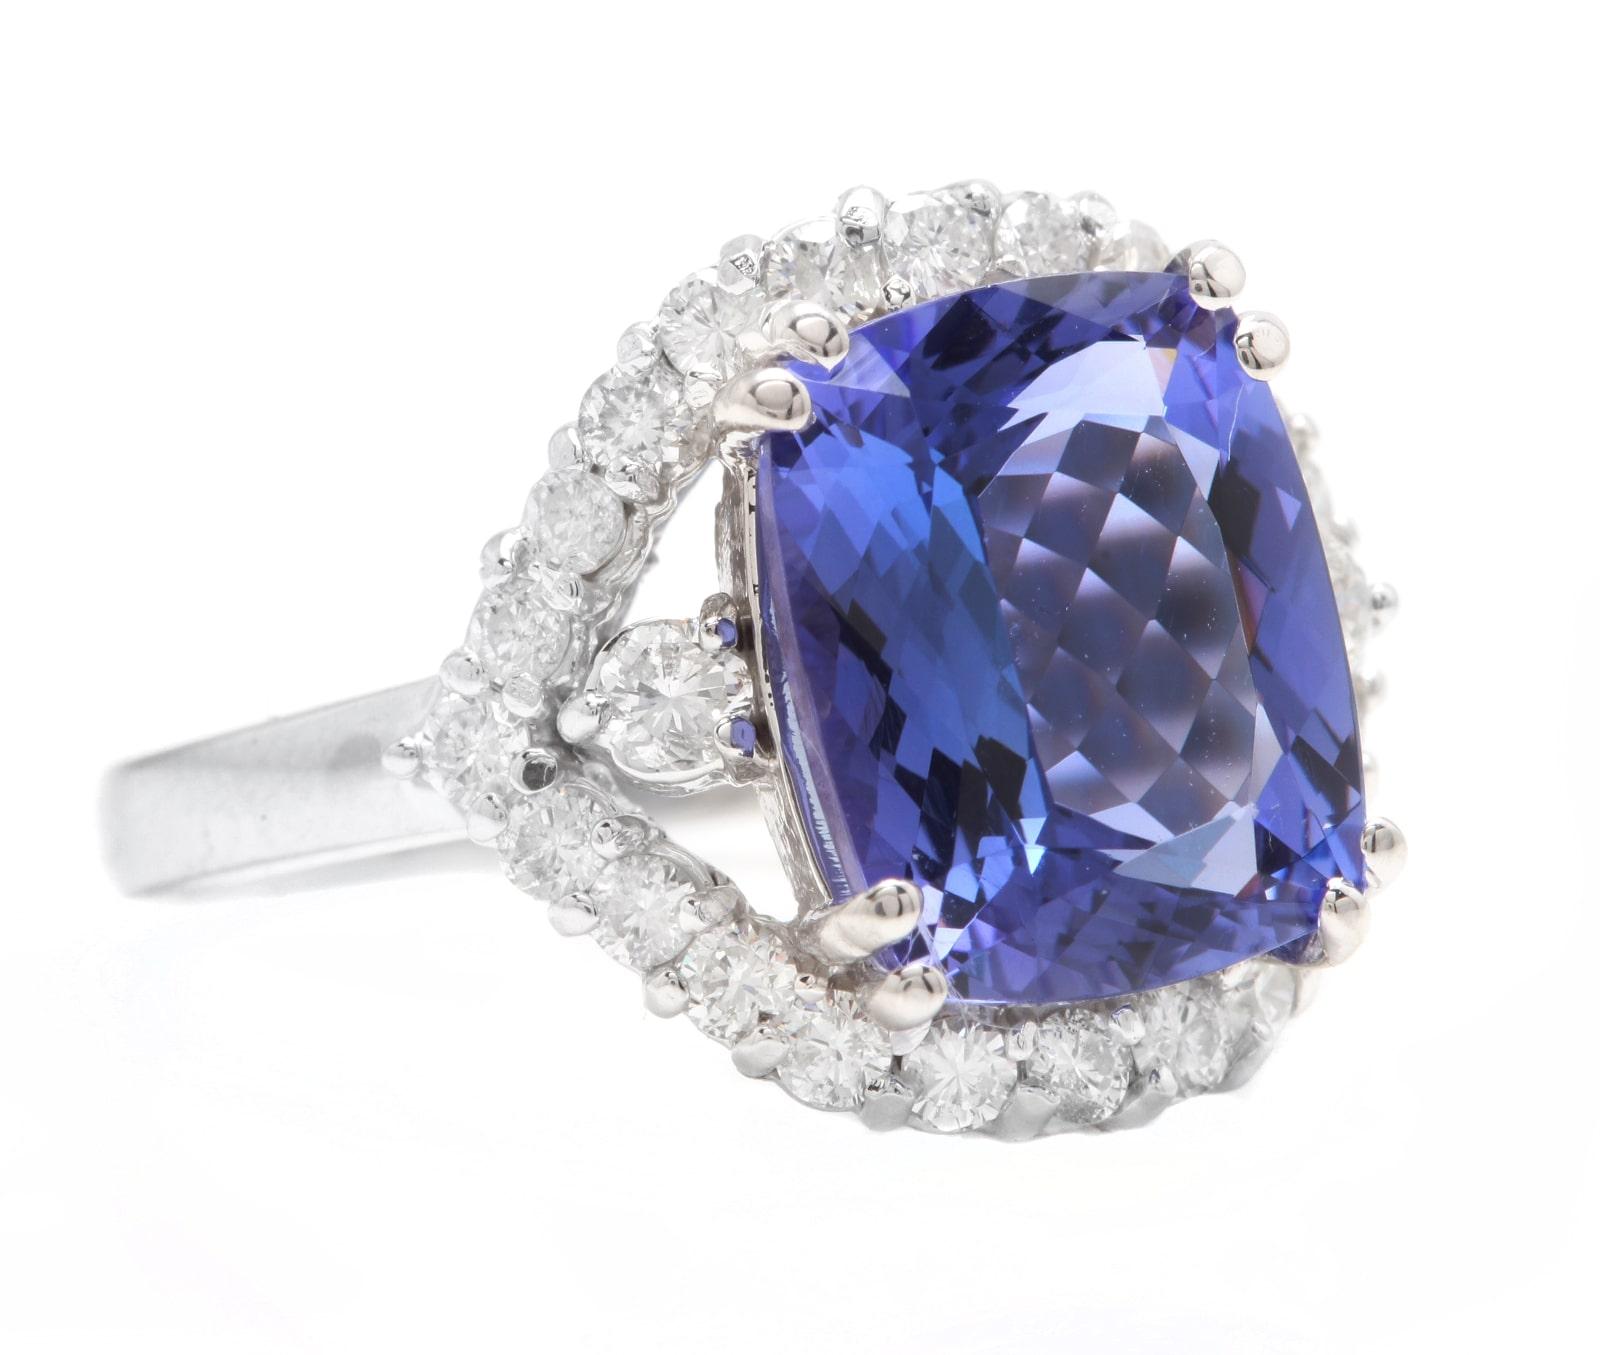 6.00 Carats Natural Very Nice Looking Tanzanite and Diamond 18K Solid White Gold Ring

Suggested Replacement Value: Approx.  $8,800.00

Total Natural Cushion Cut Tanzanite Weight is: Approx. 5.00 Carats 

Tanzanite Measures: Approx. 11 x 9mm
